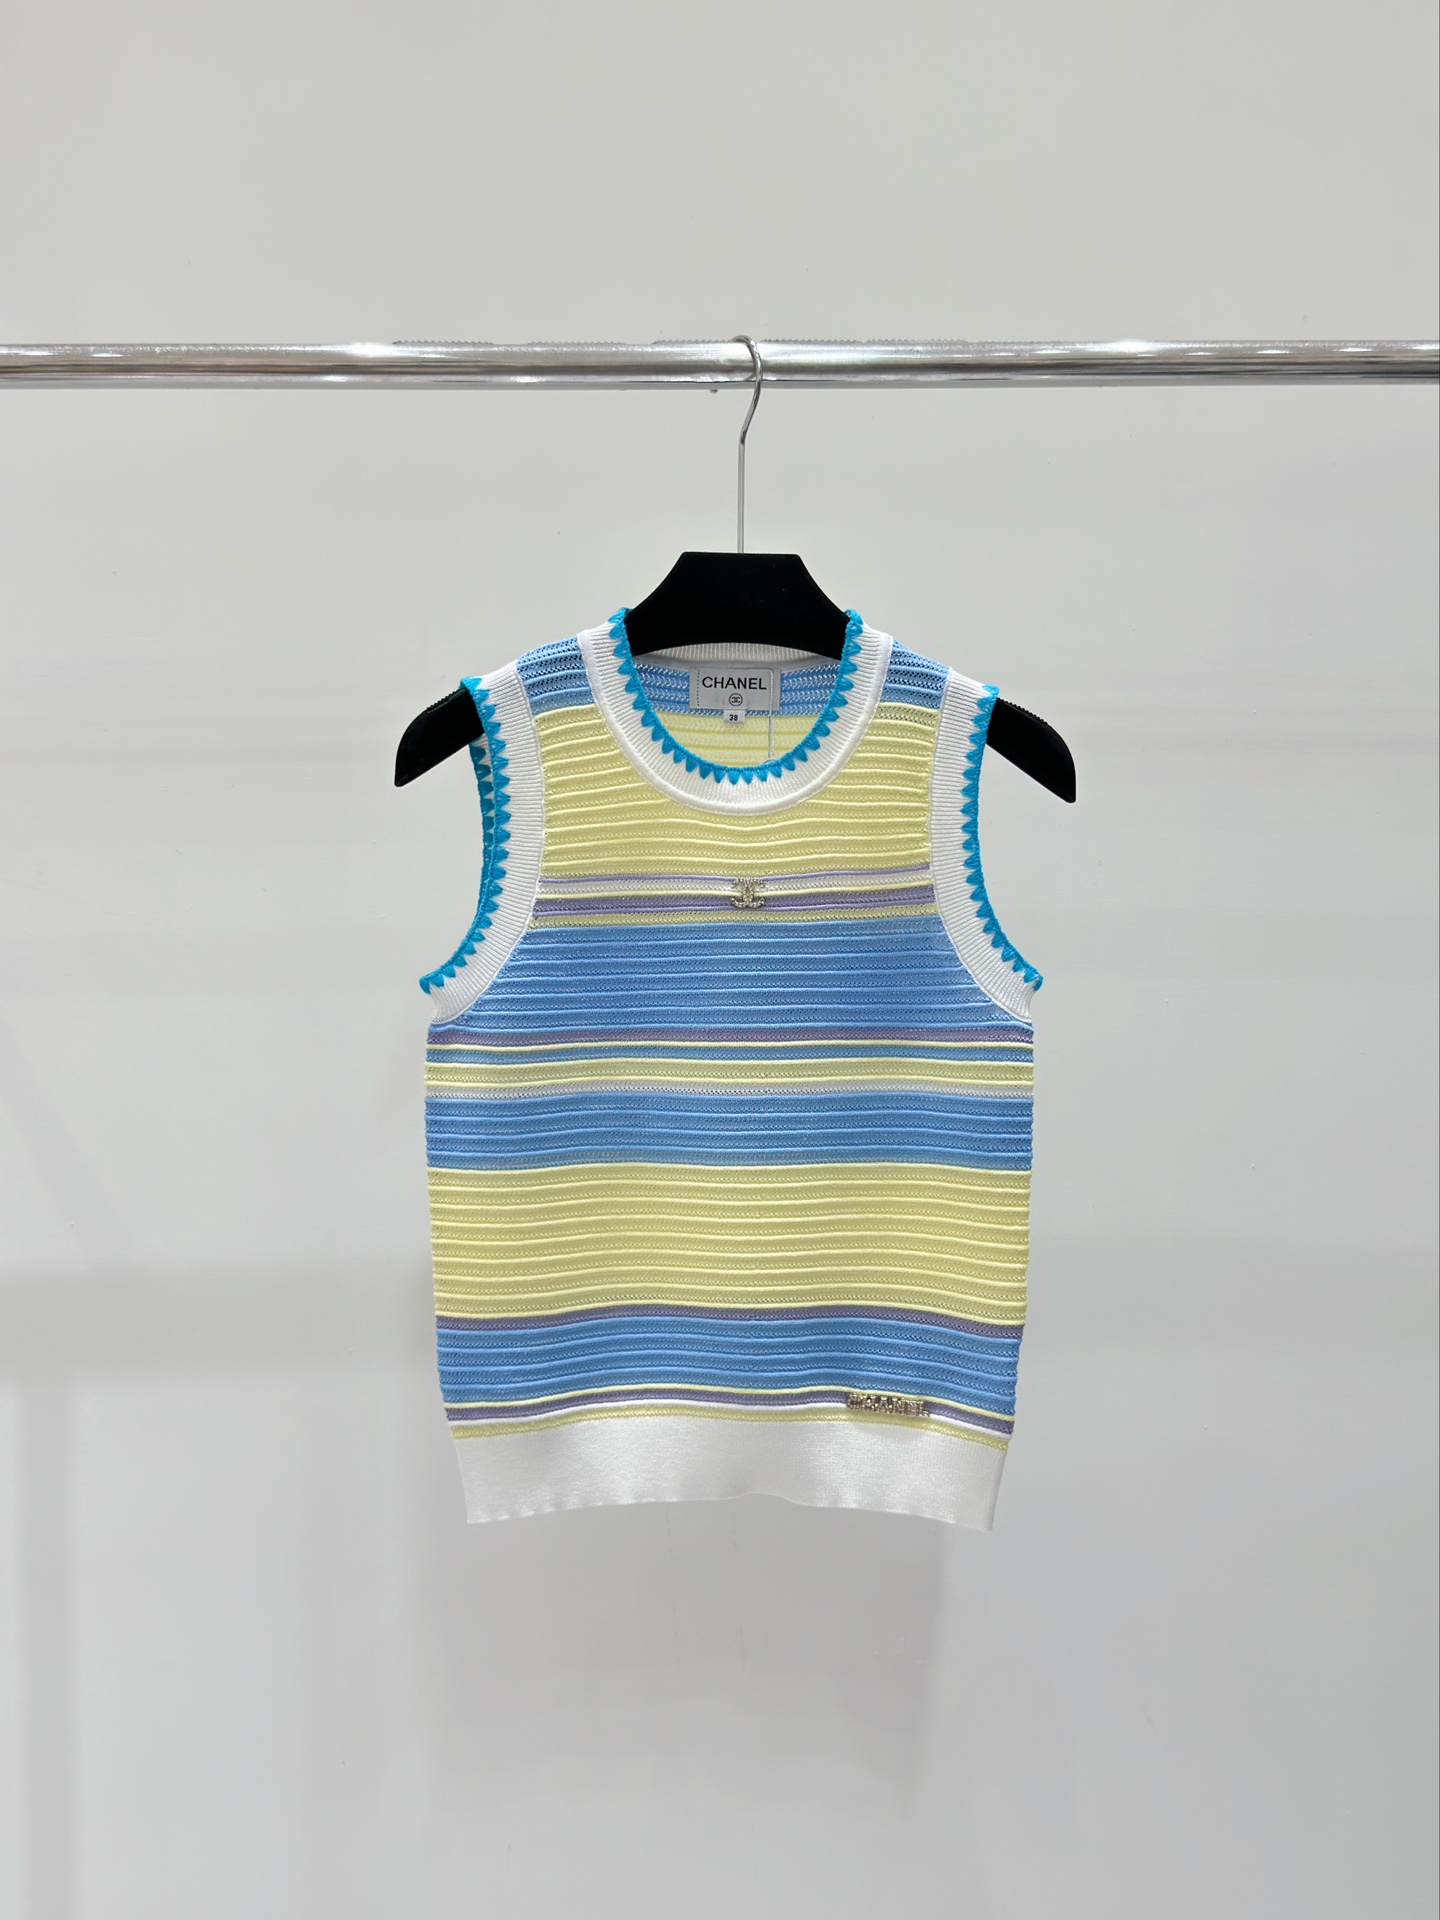 Chanel Clothing Tank Tops&Camis Replcia Cheap From China
 Knitting Spring/Summer Collection